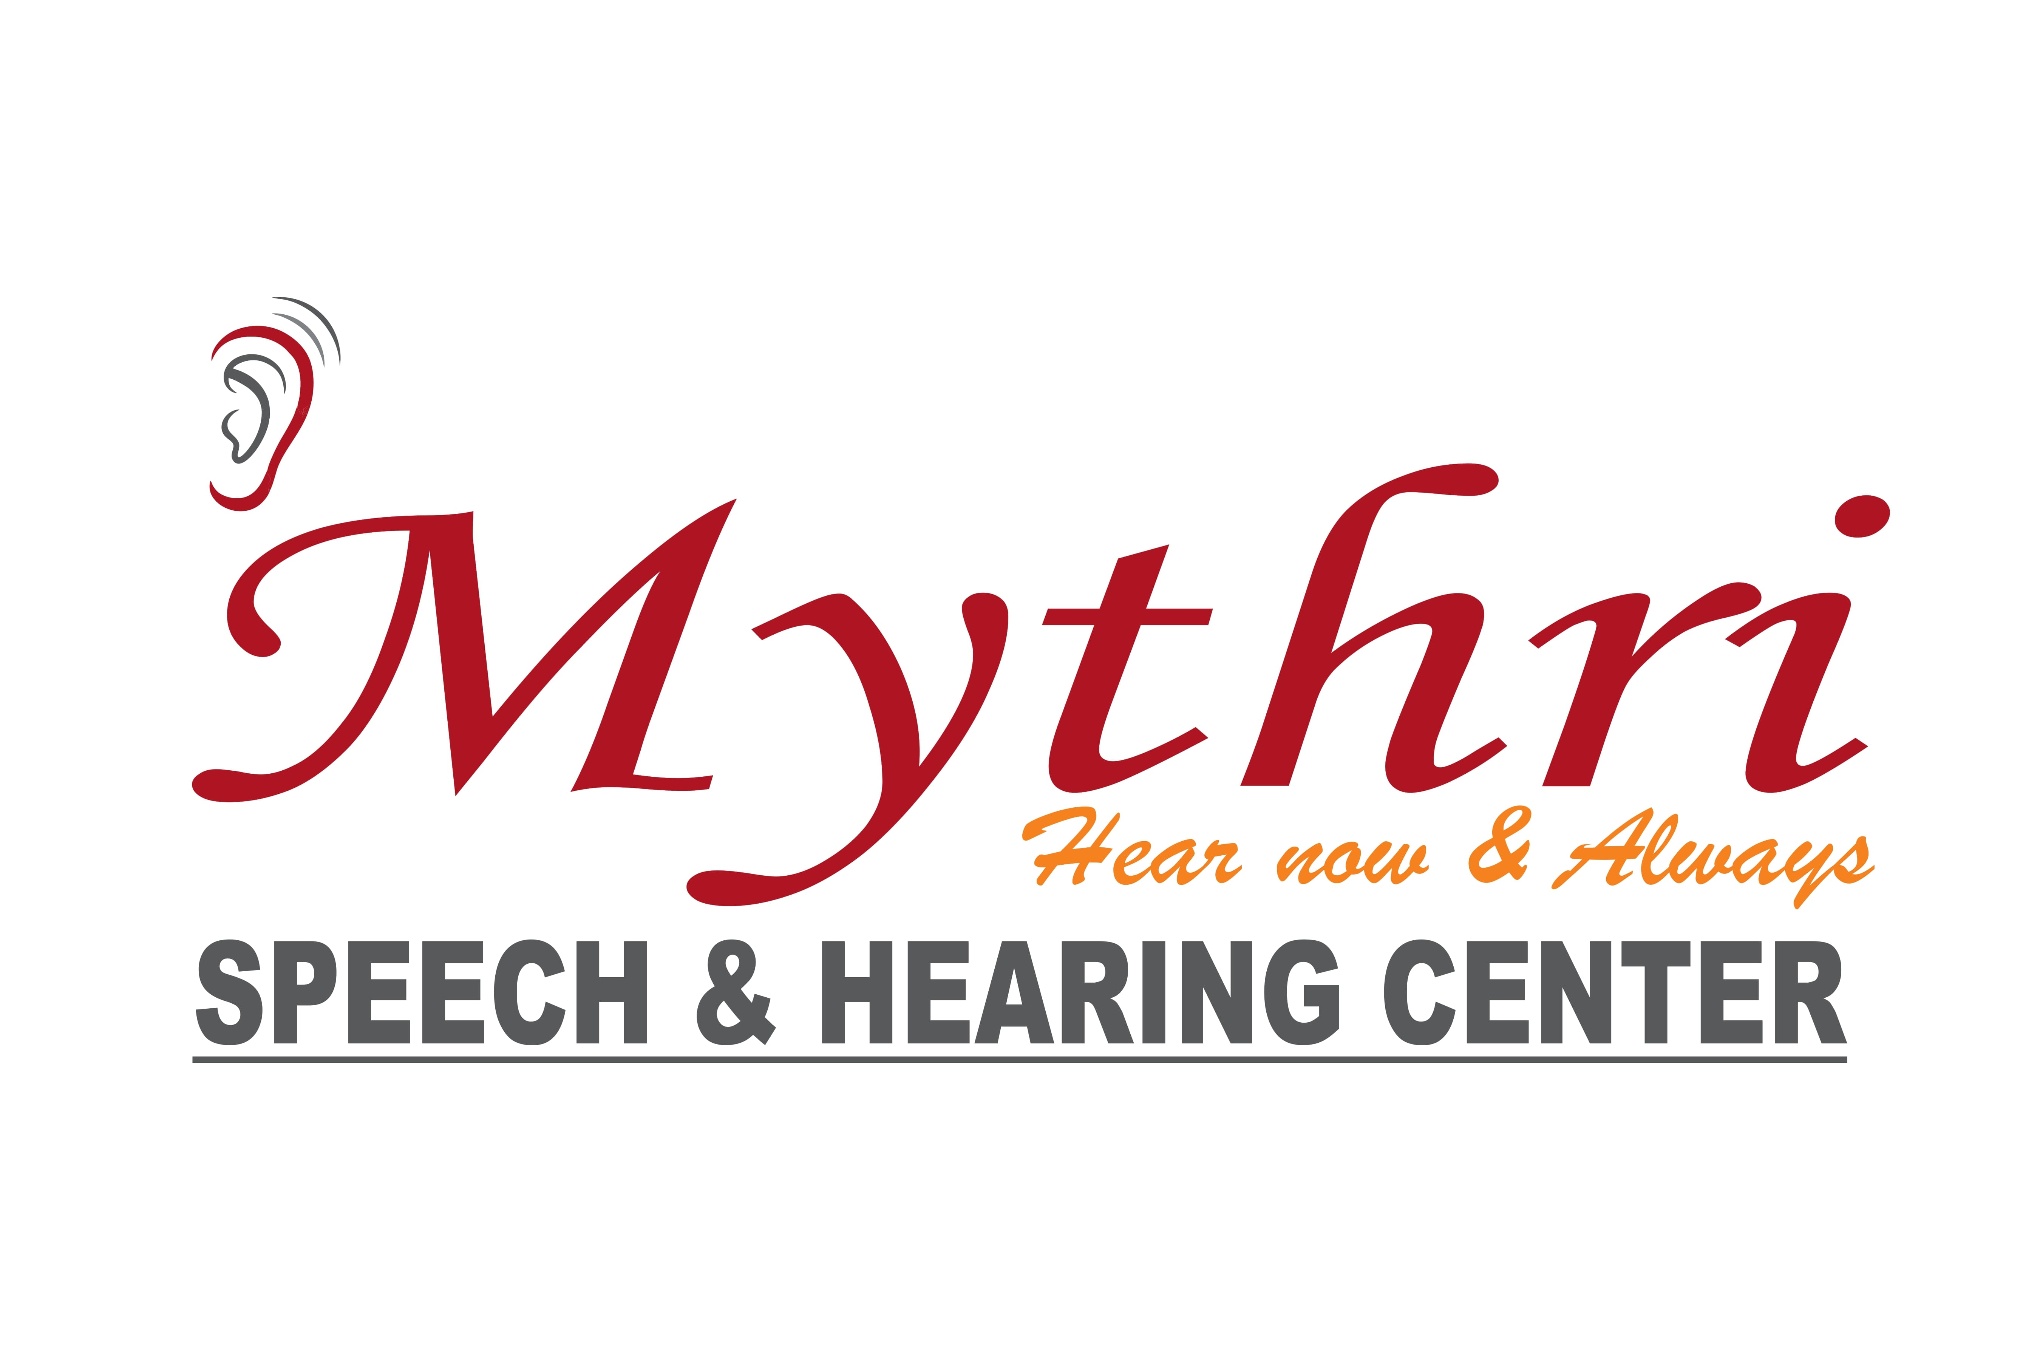 Hearing Loss | Hearing Loss Types | Hearing Loss Symptoms | Hearing Impairment Types | Hearing Loss Risks | Know More About Hearing Loss